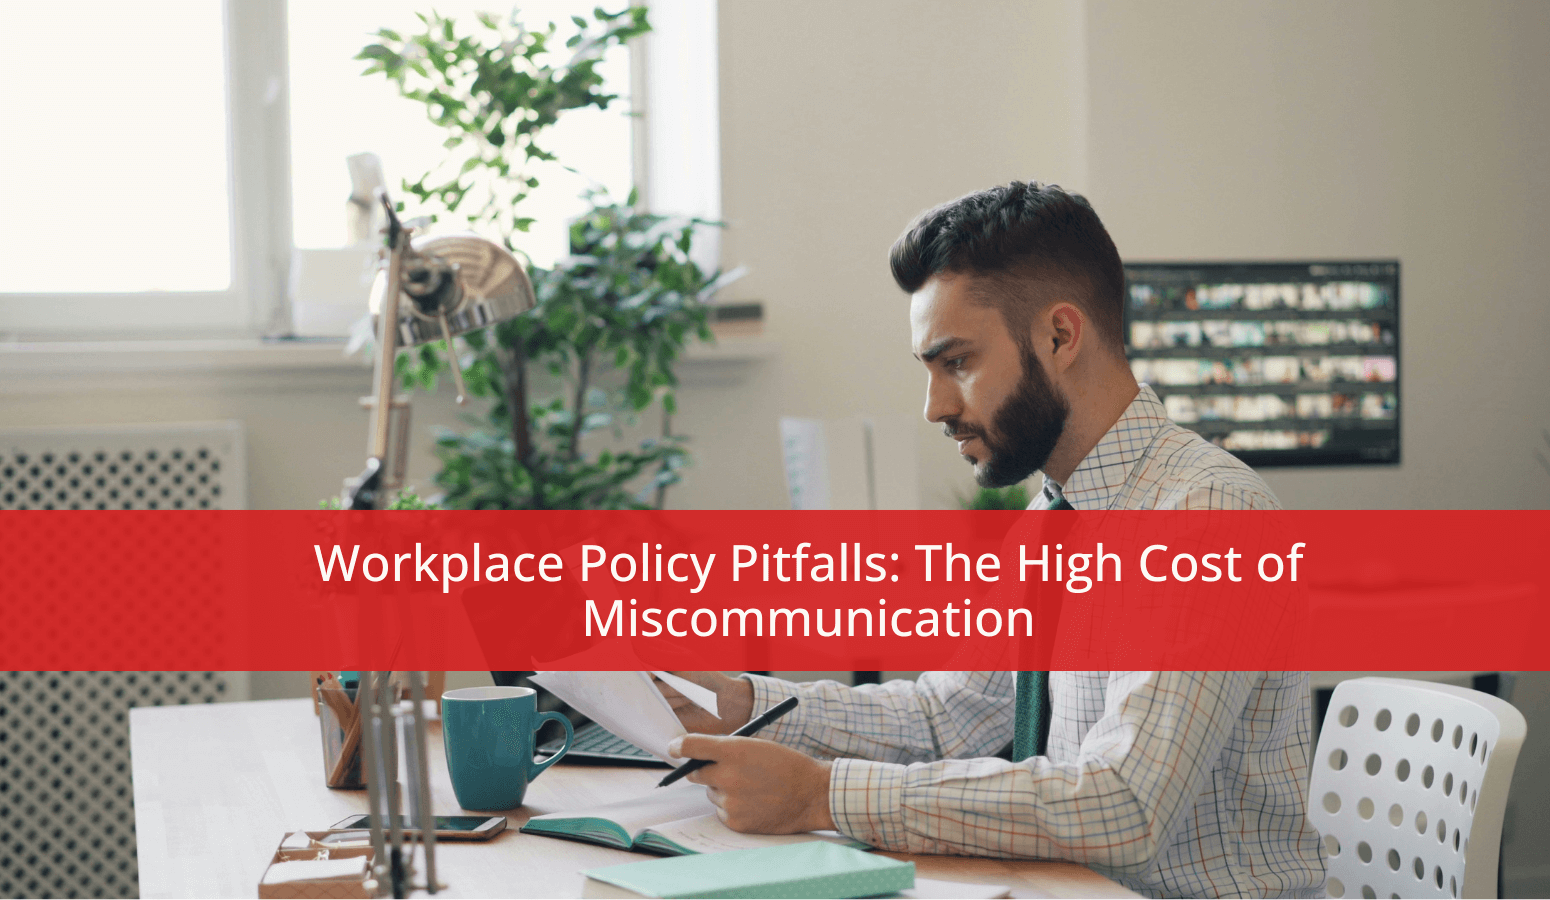 Featured image for “Workplace Policy Pitfalls: The High Cost of Miscommunication”